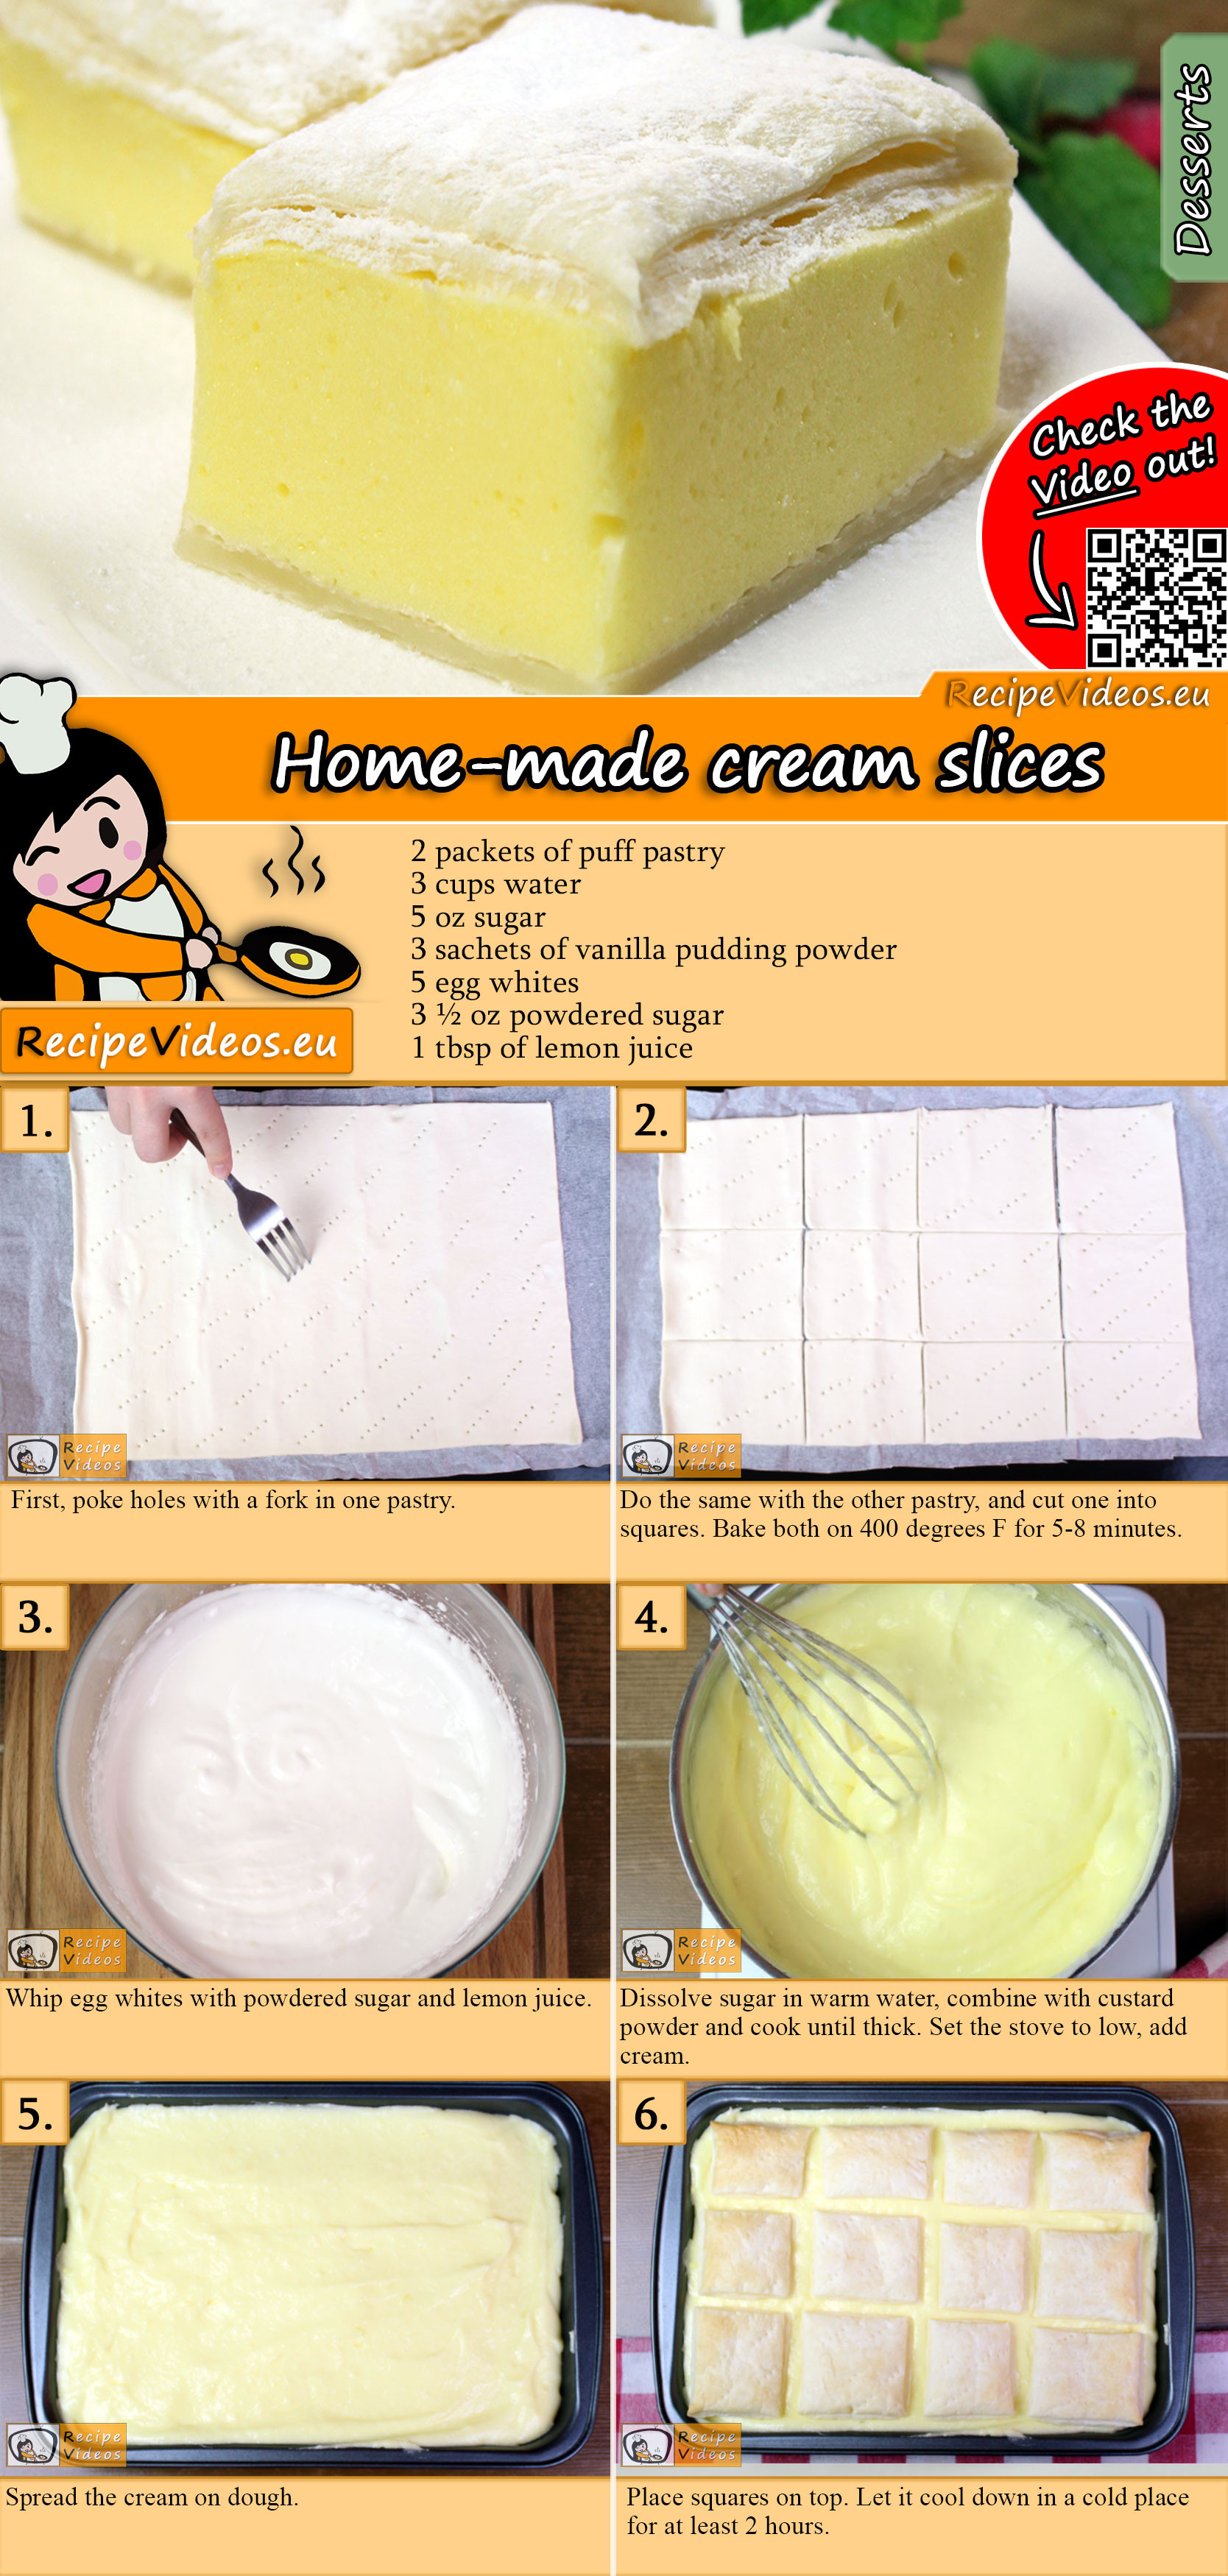 Home-made cream slices recipe with video